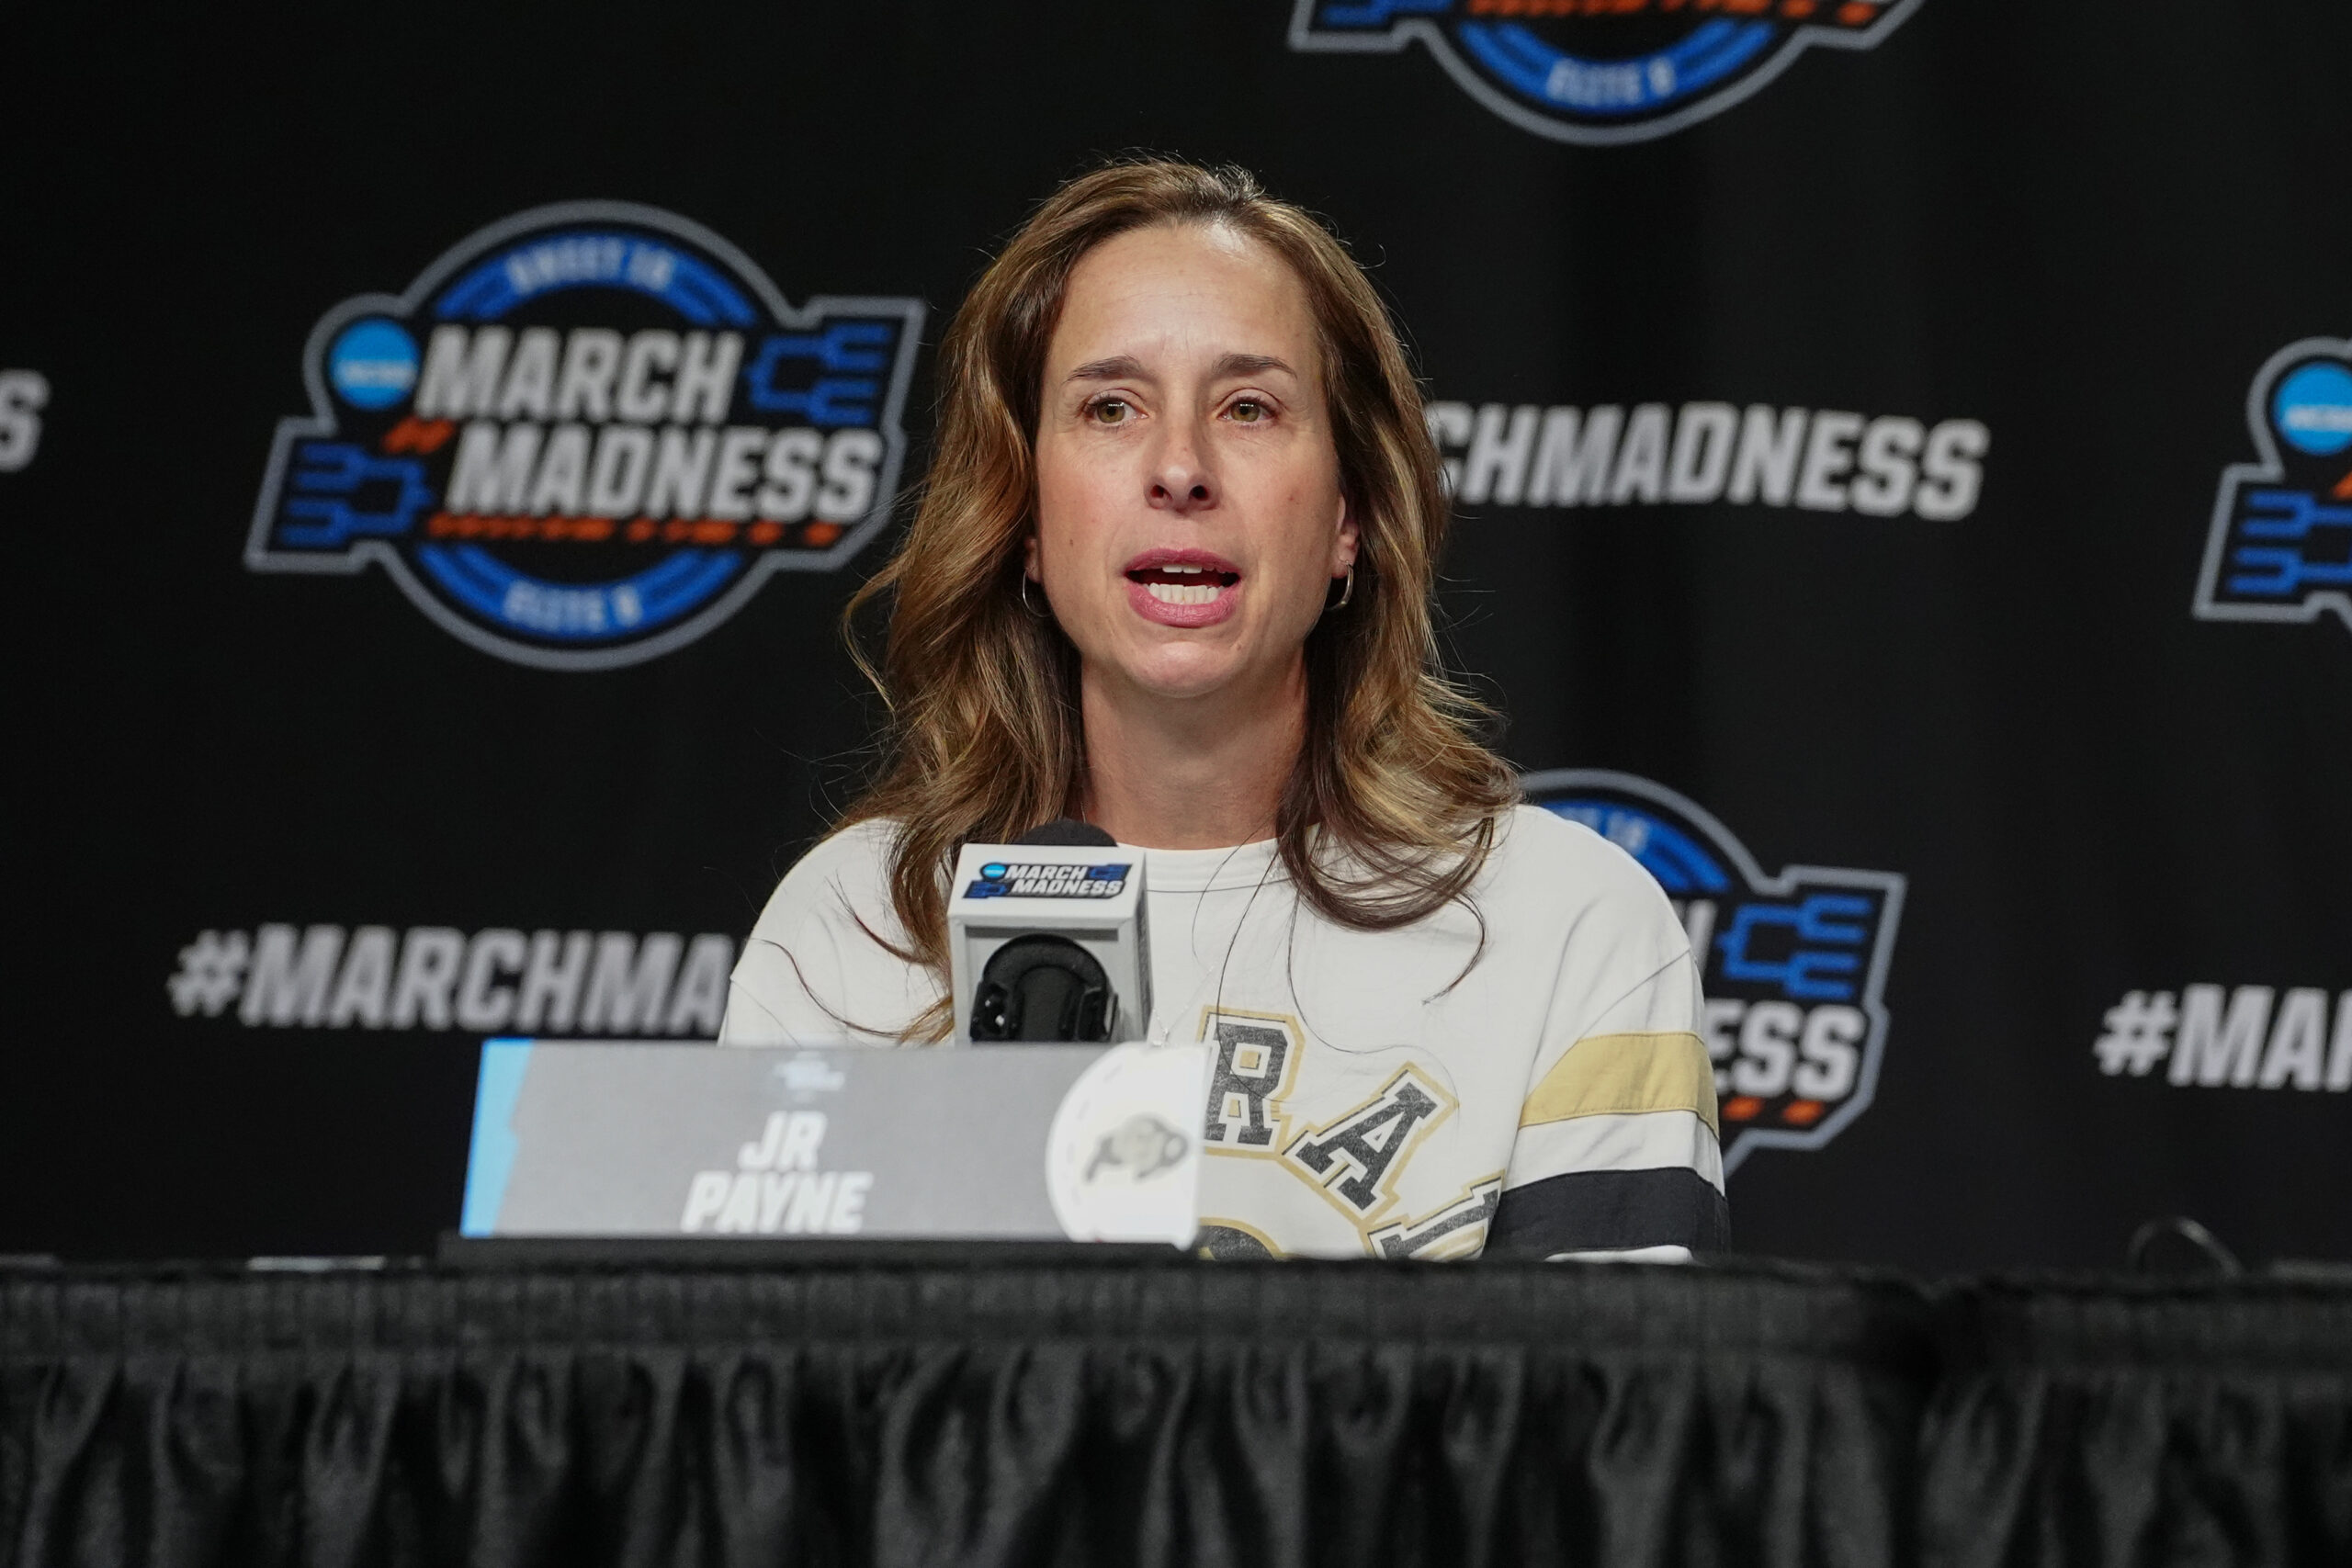 Everything Colorado said ahead of their matchup with Iowa